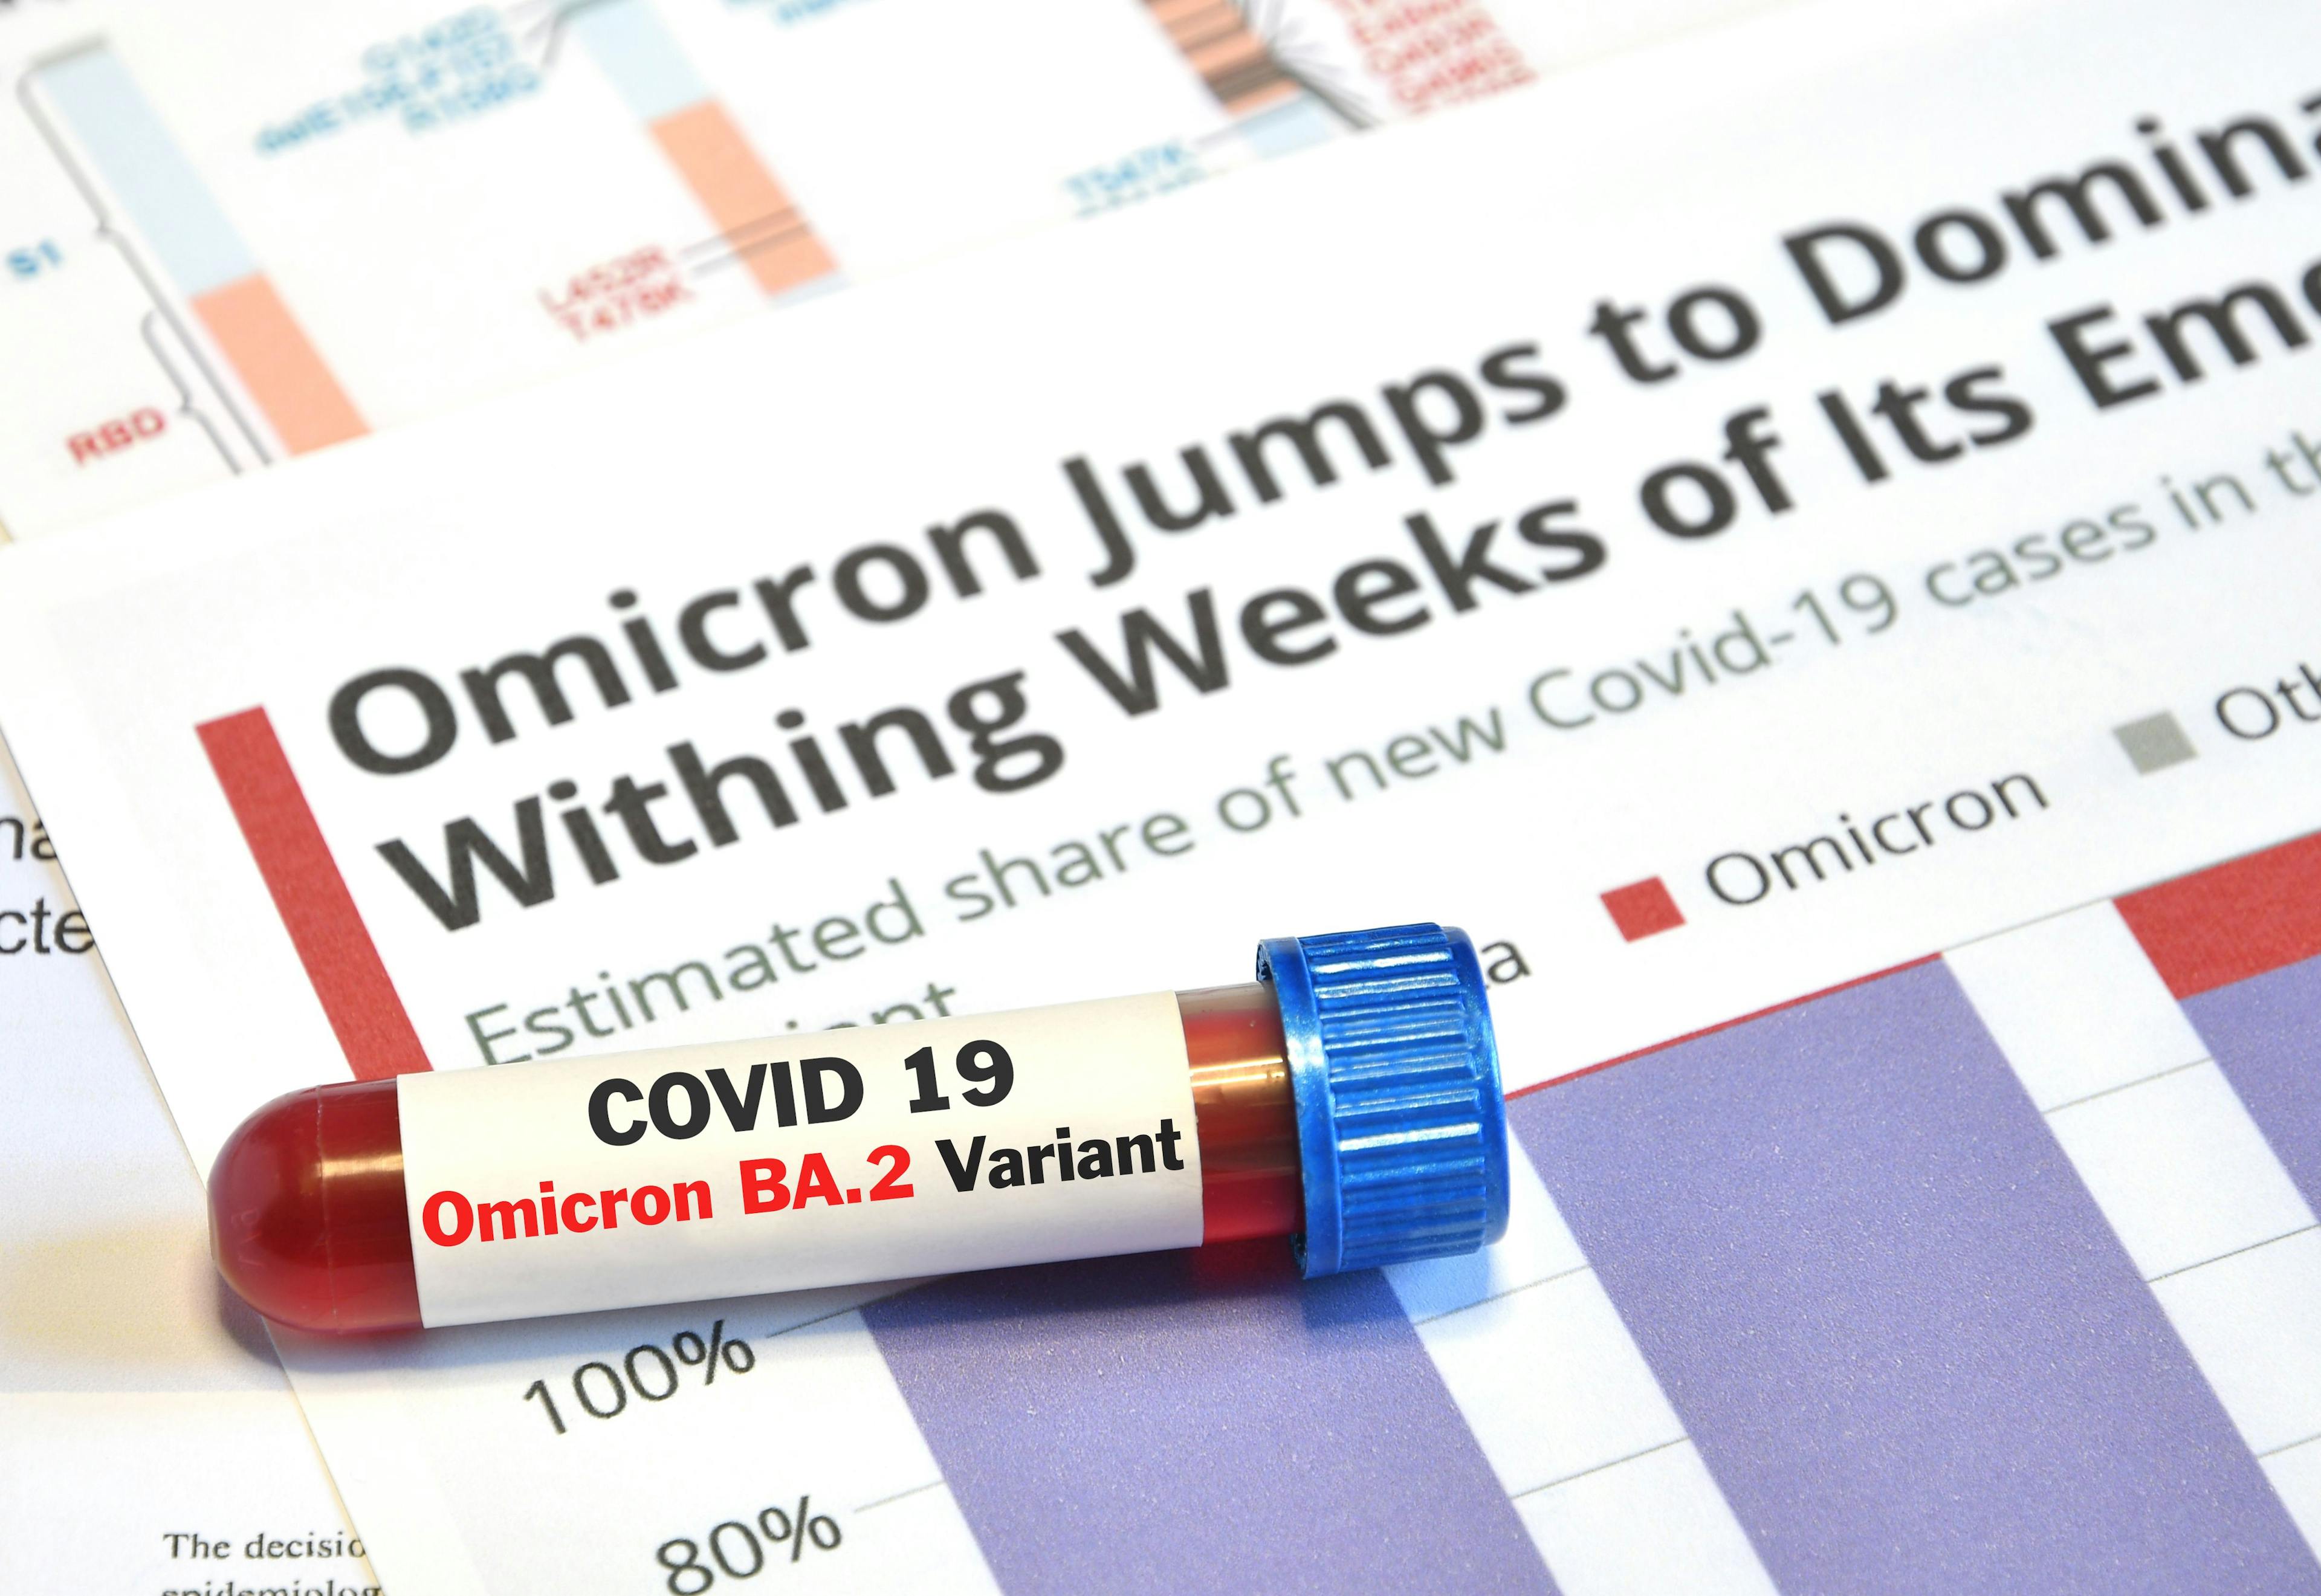 The BA.2 Omicron variant maintained the mutations necessary for viral entry, but developed an increased ability to evade neutralization by monoclonal antibodies.